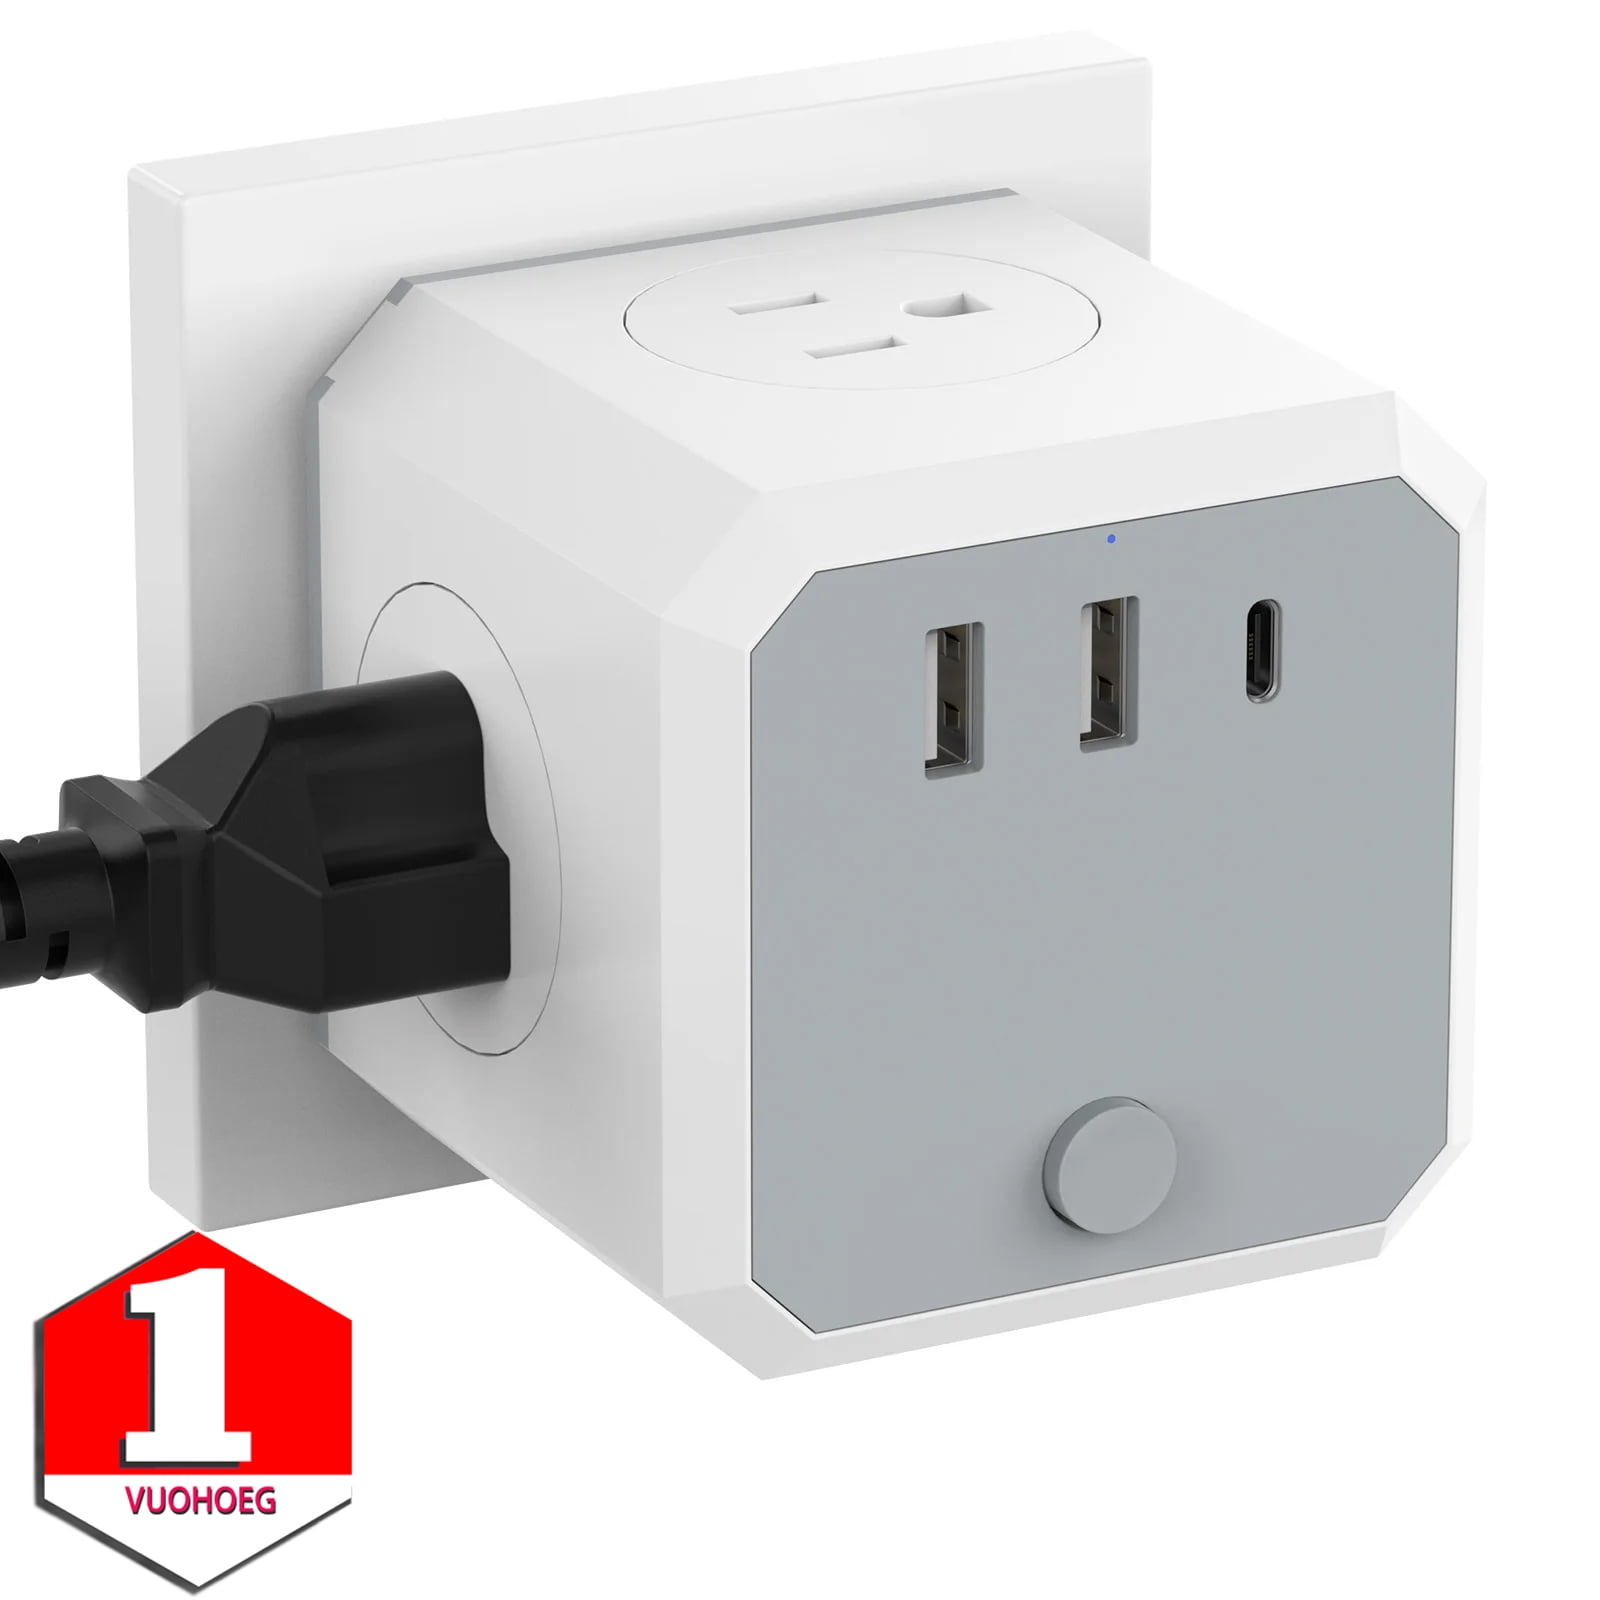 Mini Remote Control Outlet Plug Adapter with Remote, 656ft Range